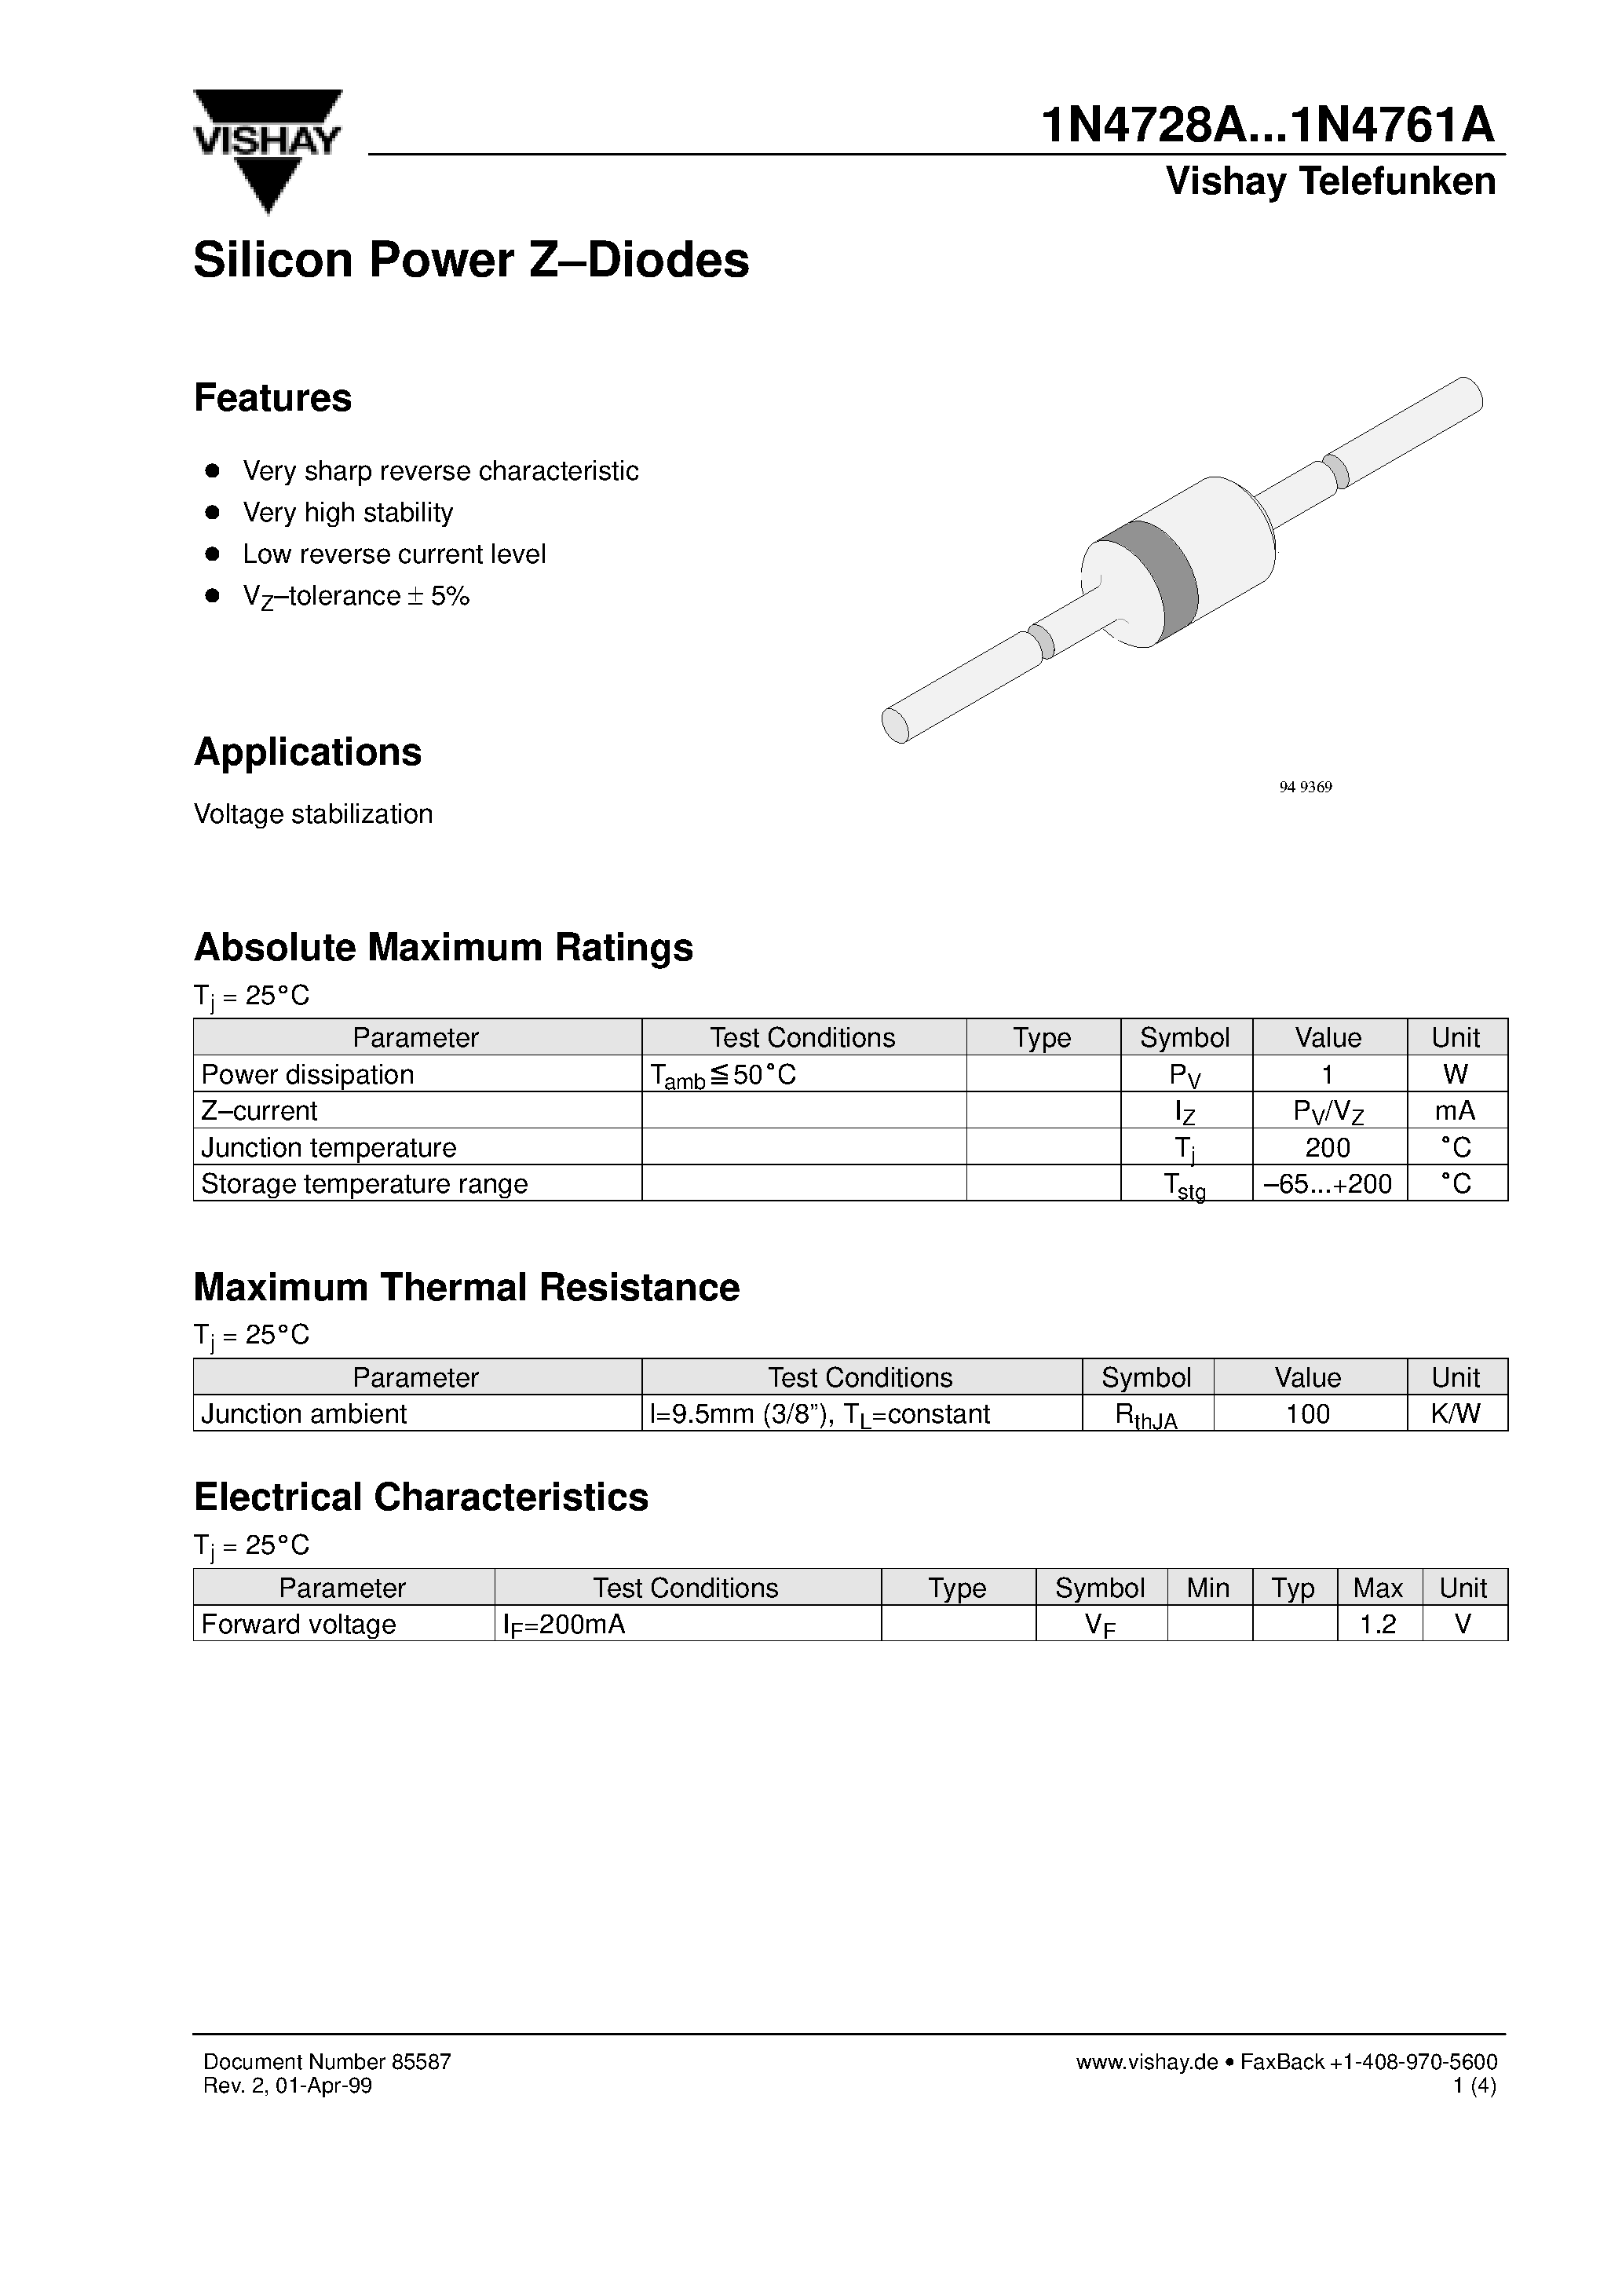 Даташит 1N4748A - Silicon Power Z-Diodes страница 1